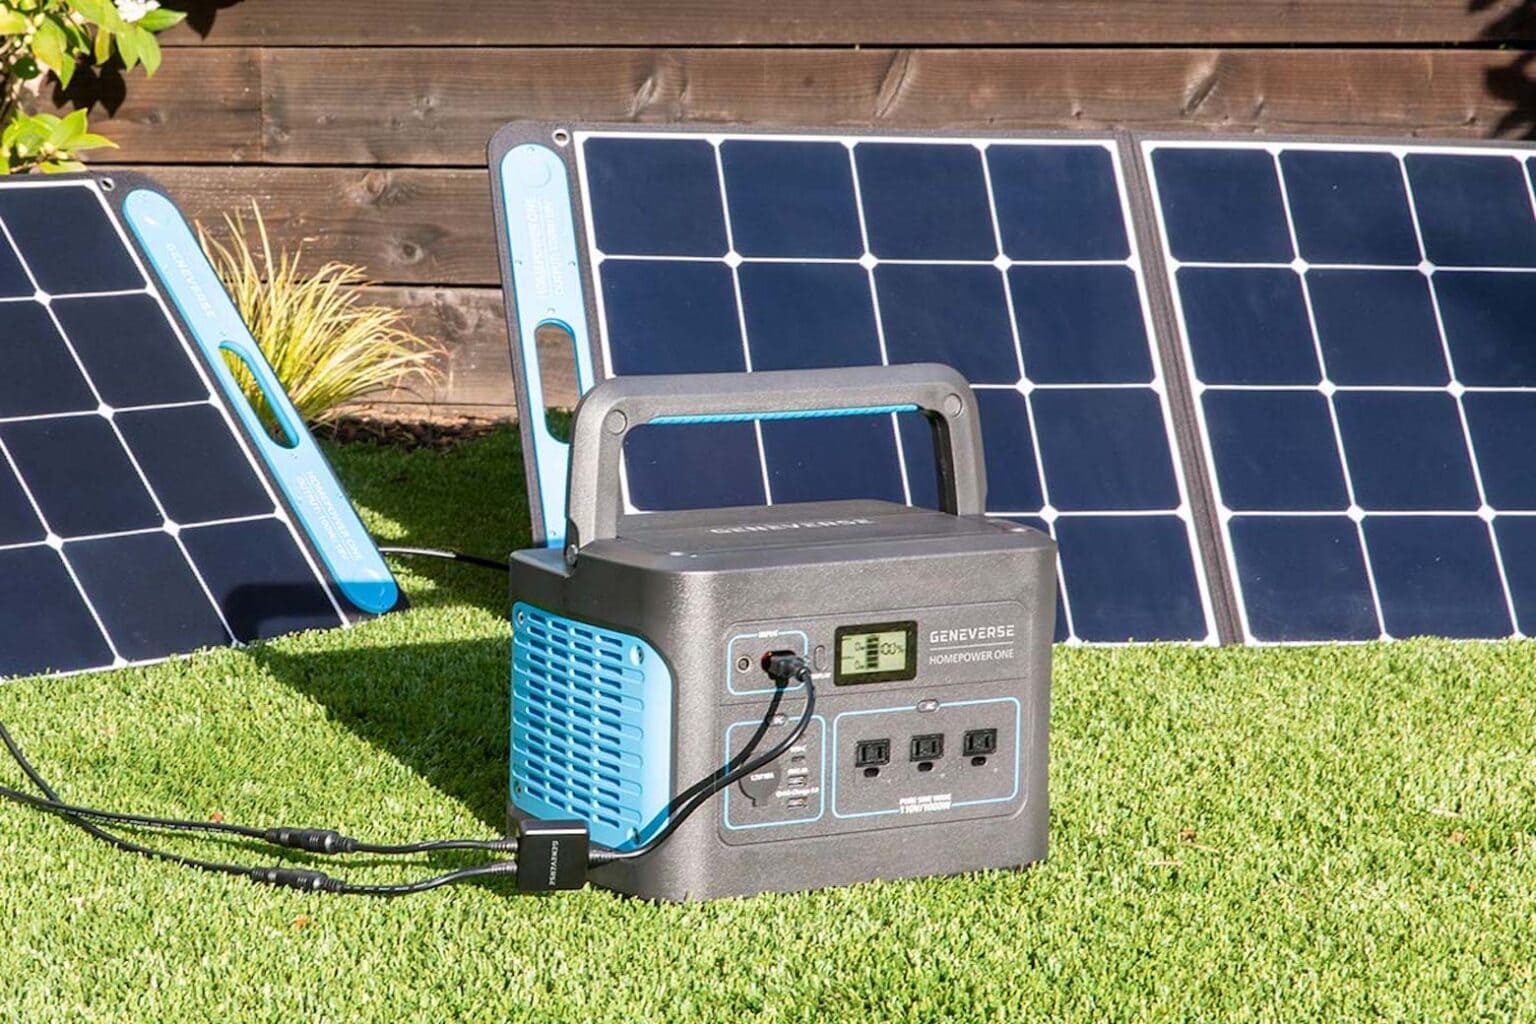 Be ready for emergencies with this solar generator bundle.